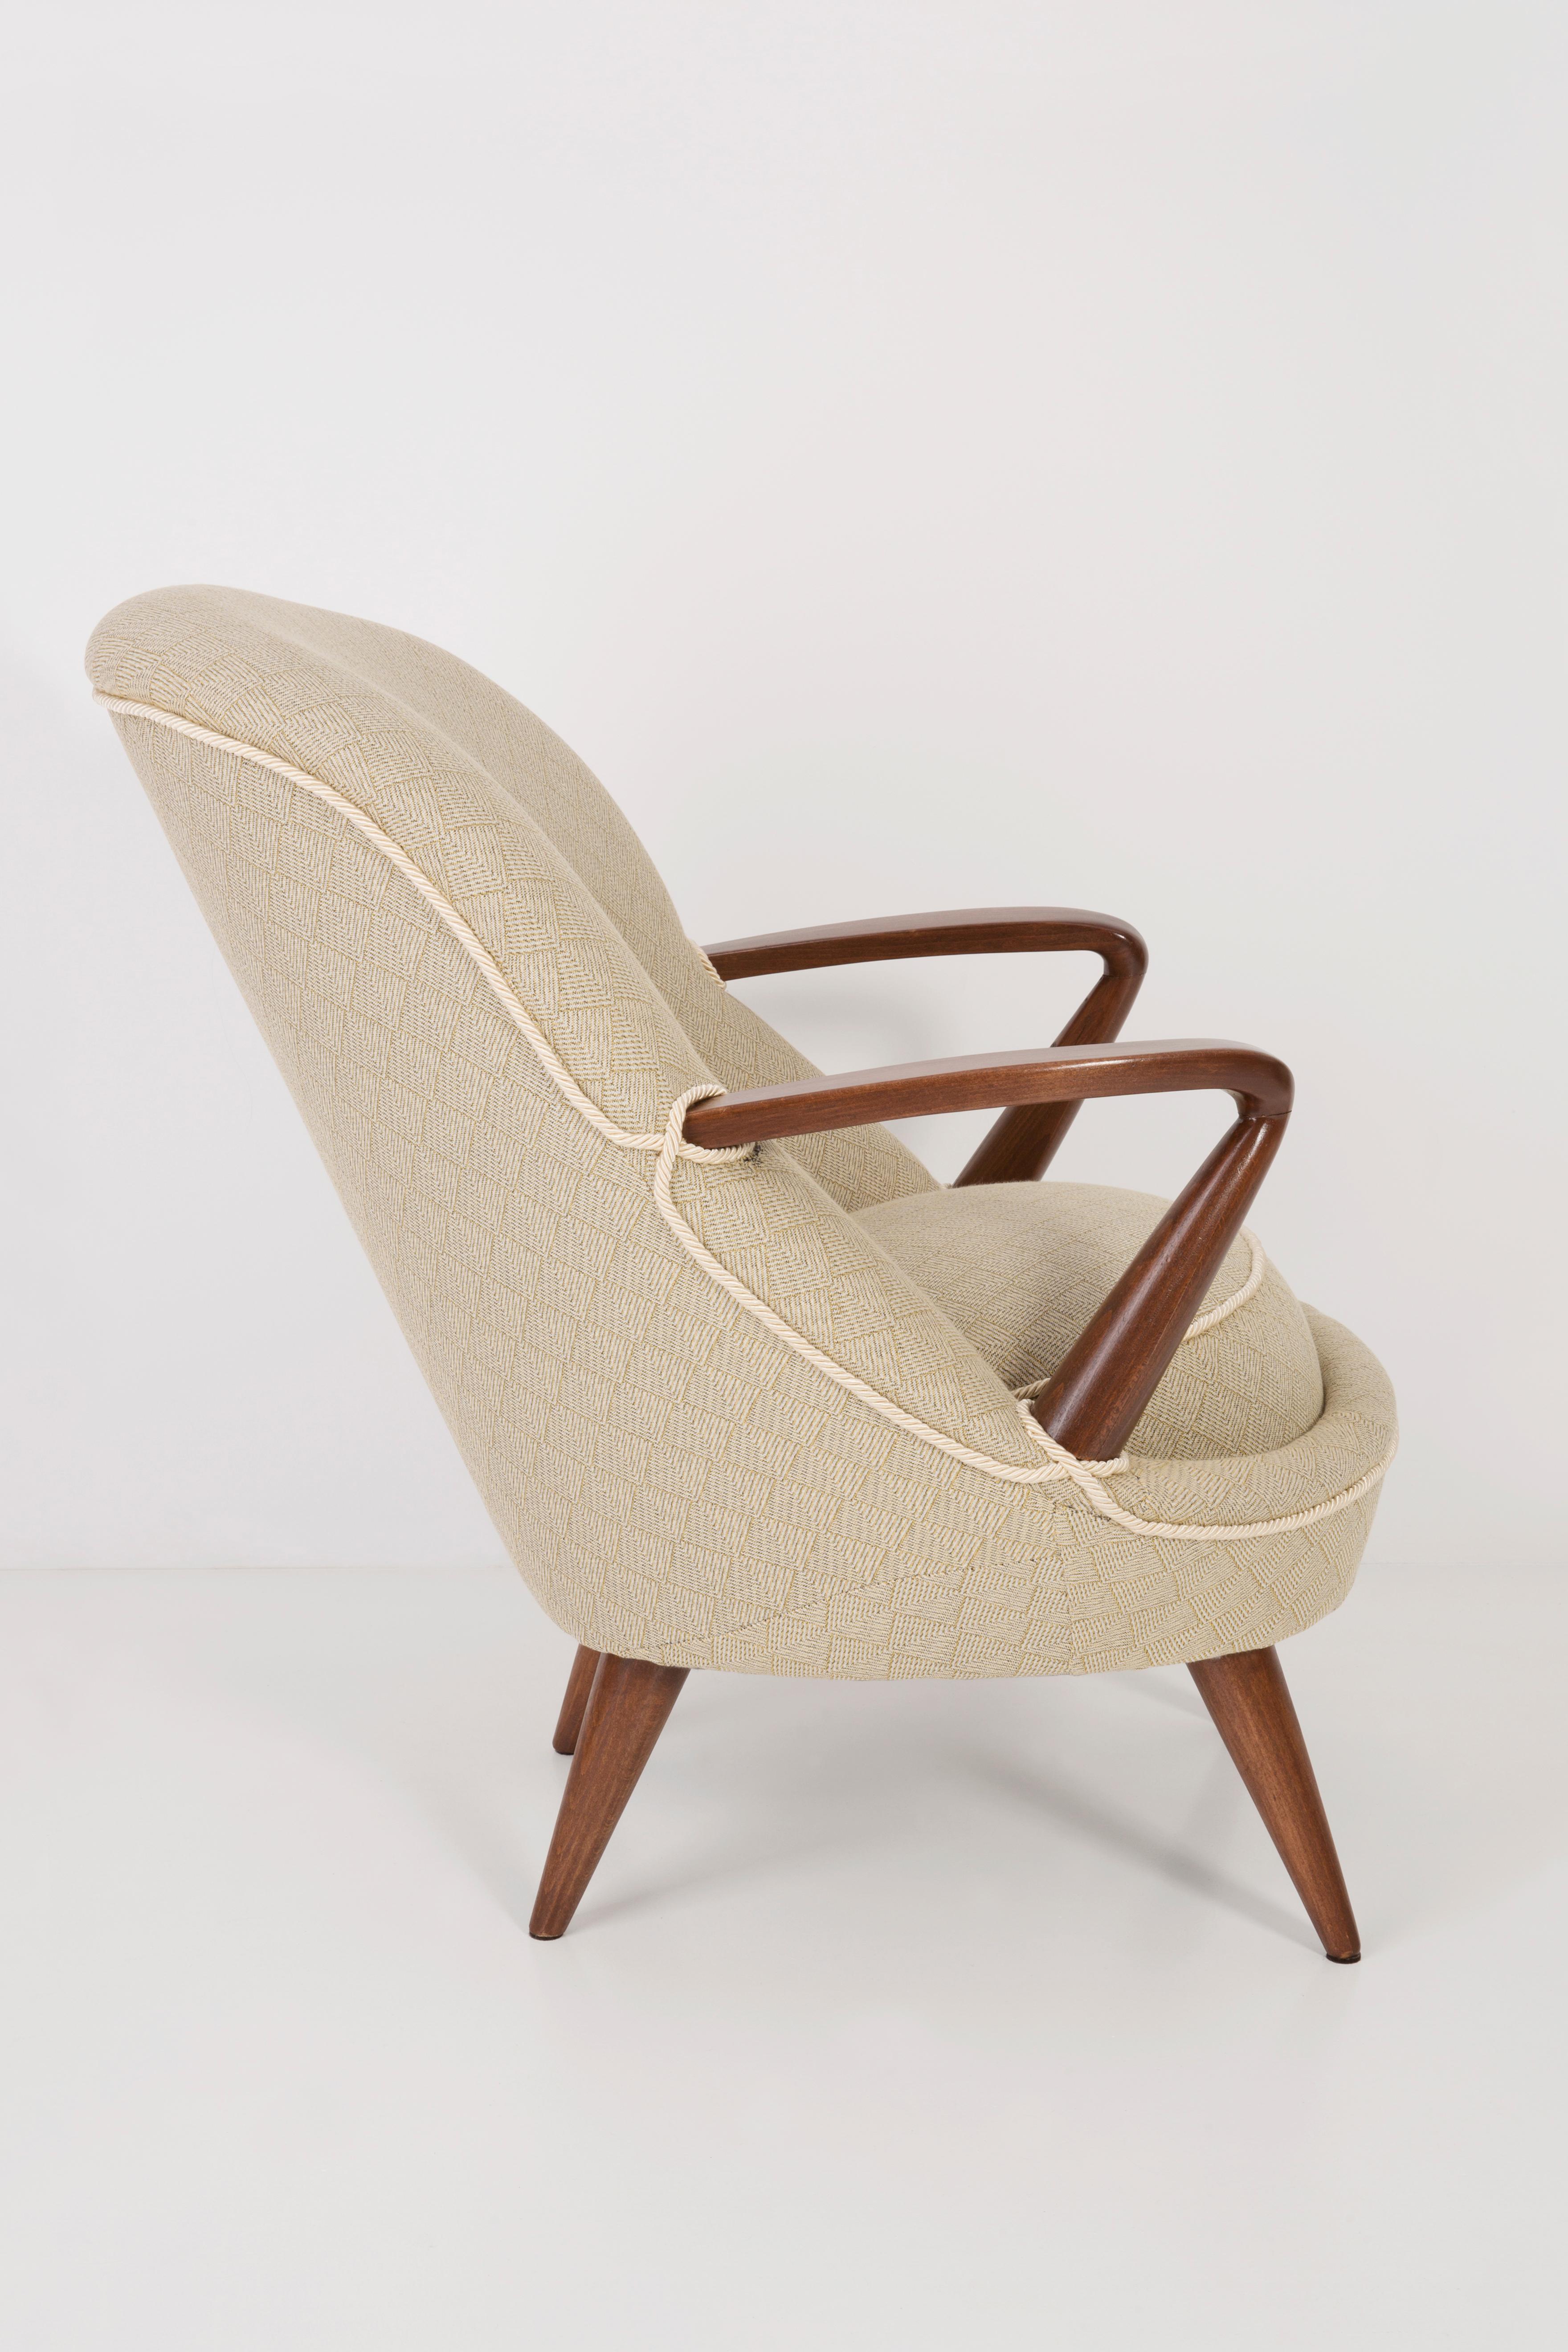 Hand-Crafted Rare Armchair by Jedrachowicz Racinowski, 345 Type, 1950s, Poland For Sale